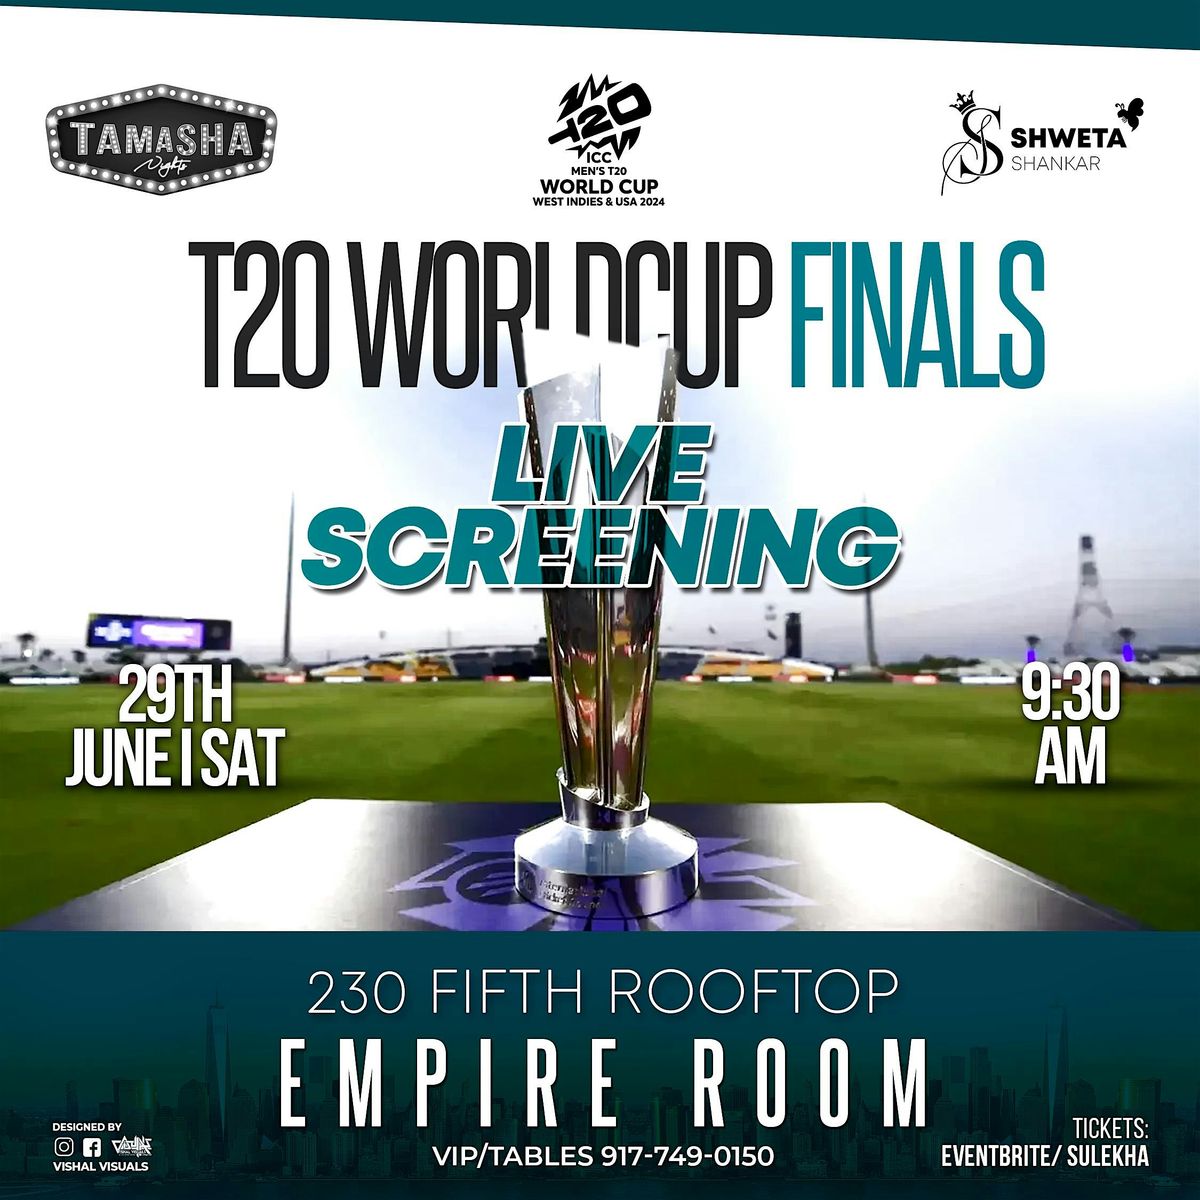 NYC T20 WORLD CUP FINALS | DJ | DHOL | LIVE SCREENING | 230 FIFTH ROOFTOP